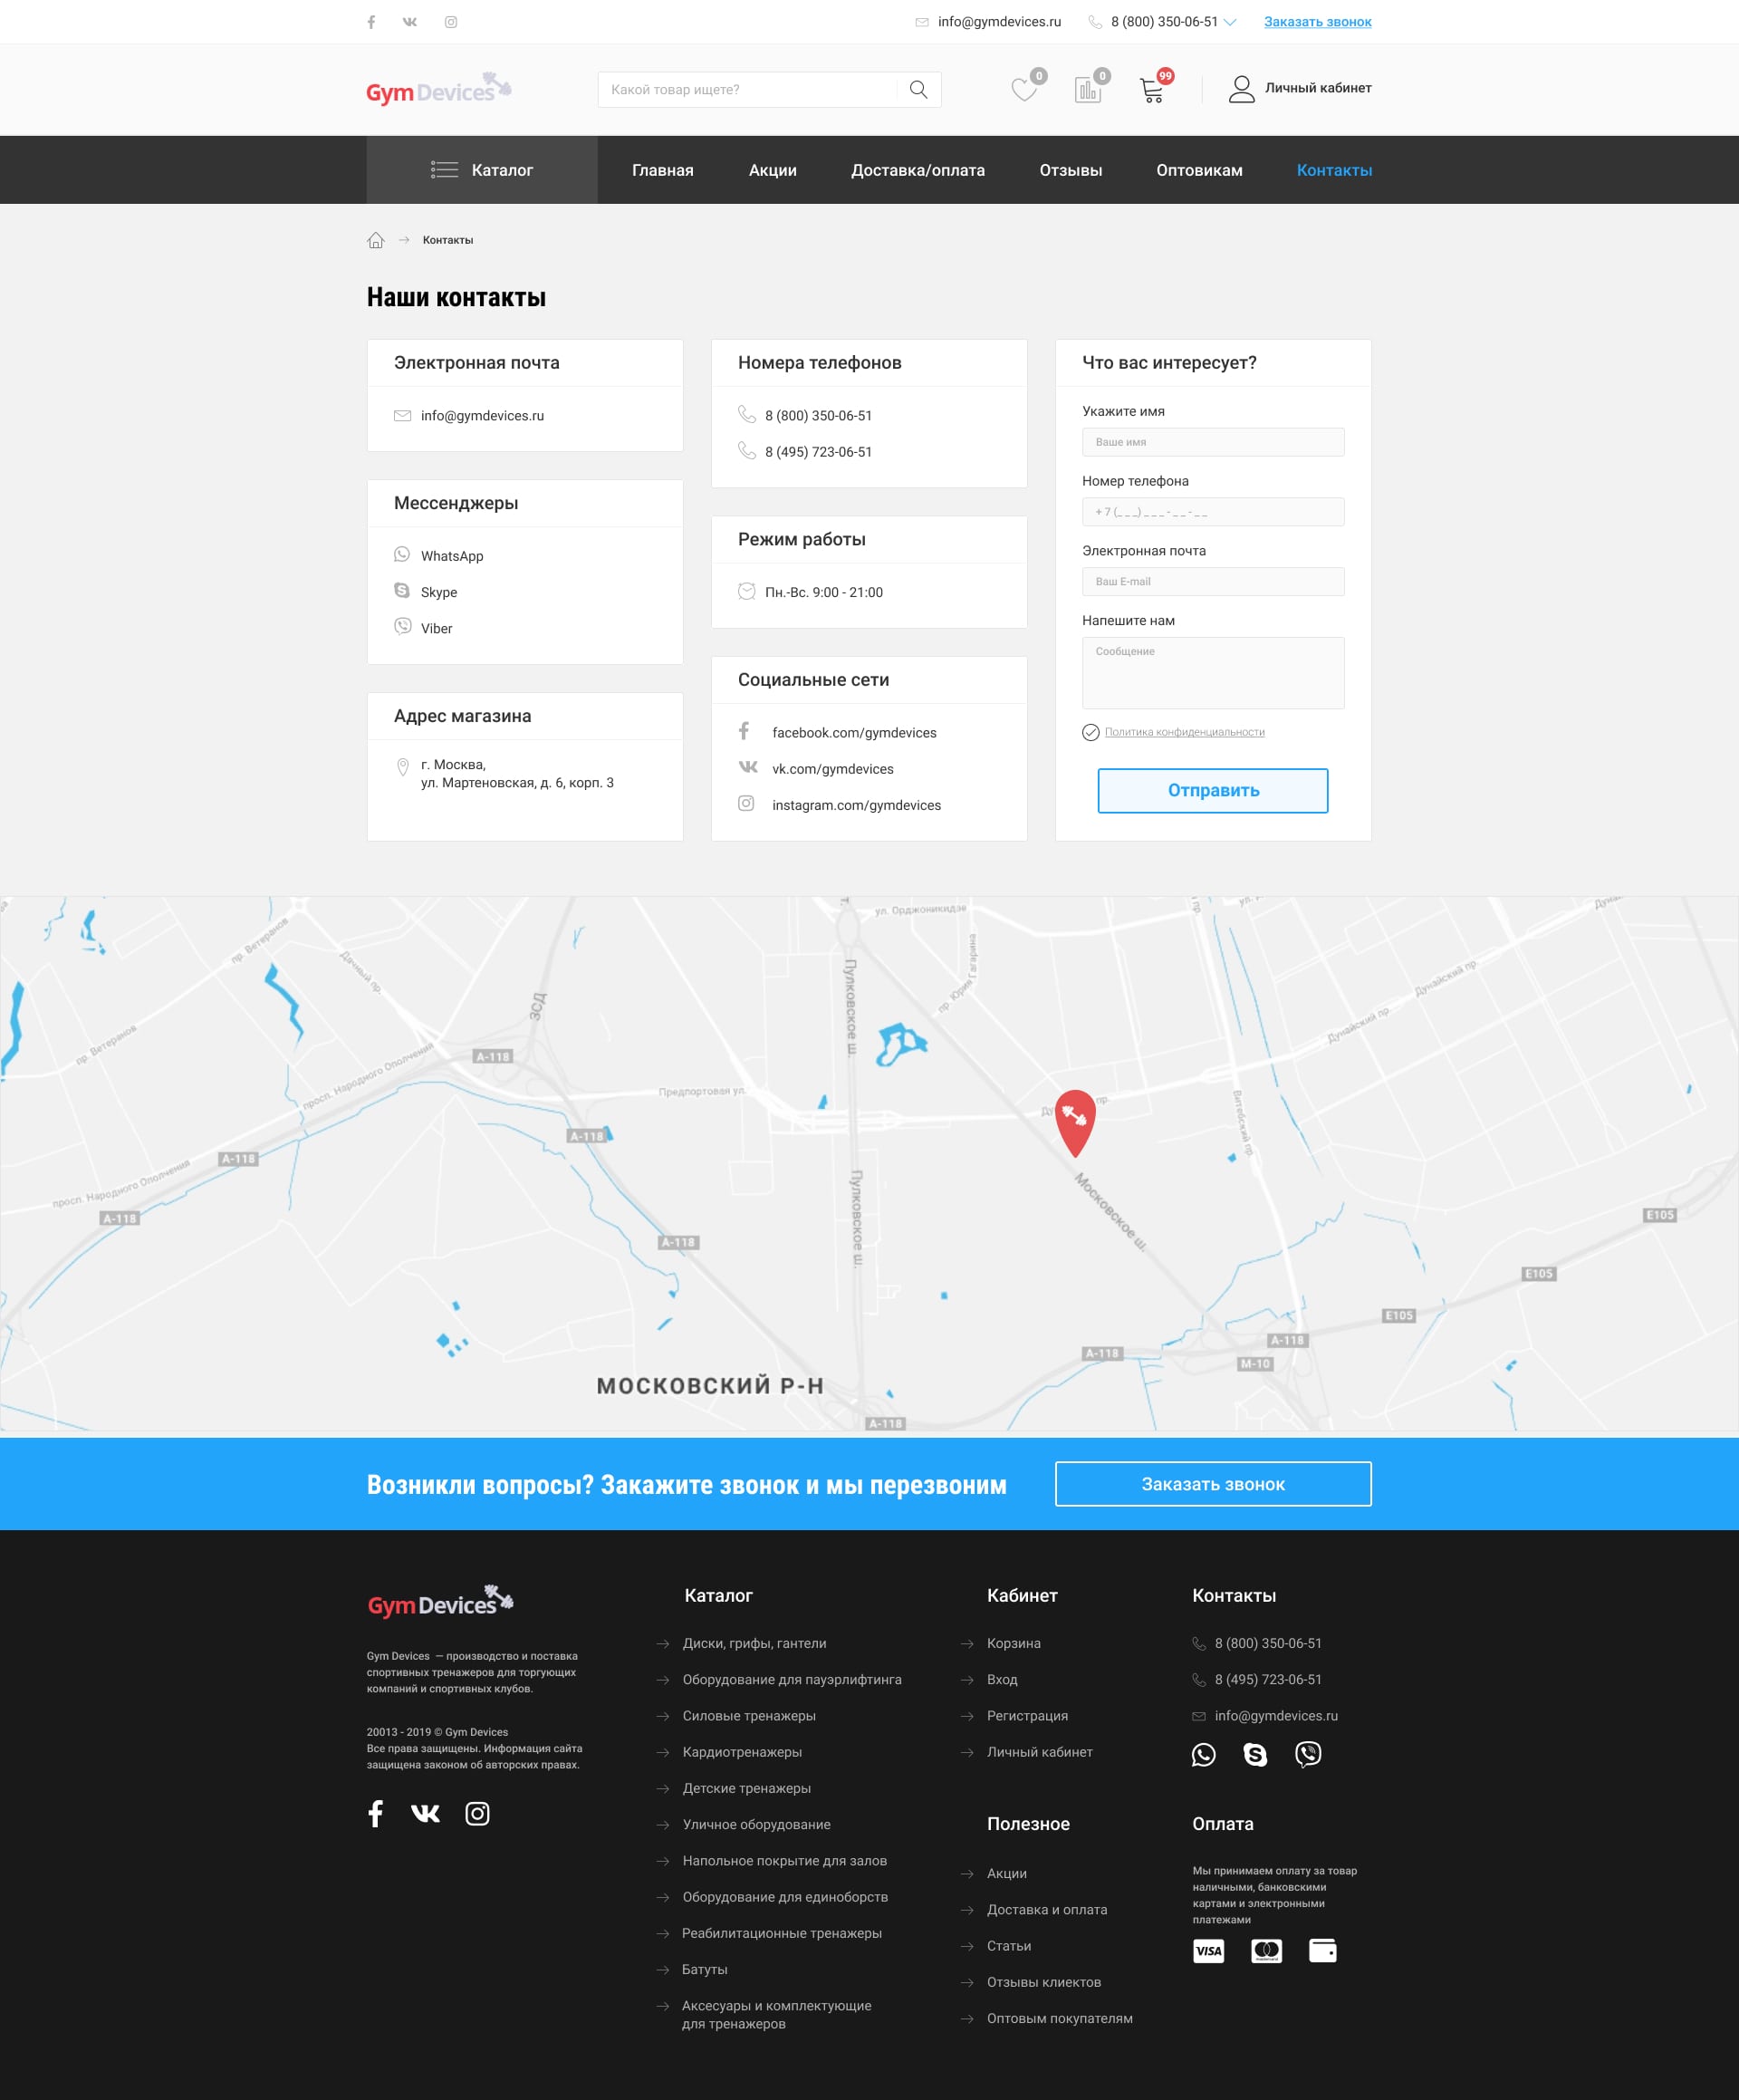 desktop version of contacts page for gym devices designed by Dima Radushev